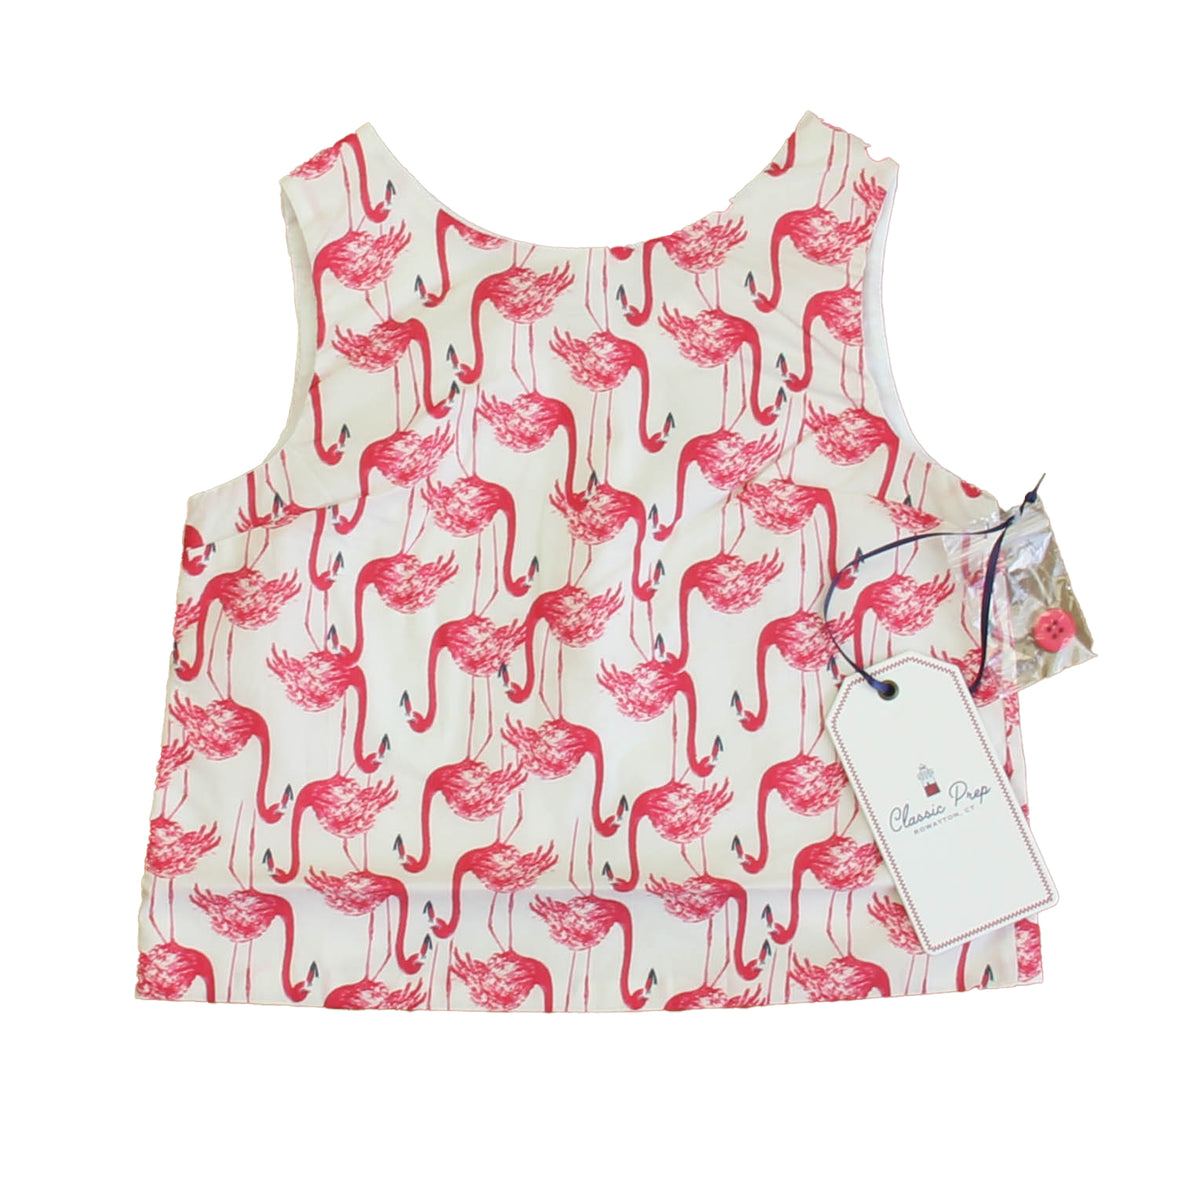 New with Tags: Frolic Flamingos Top -- FINAL SALE